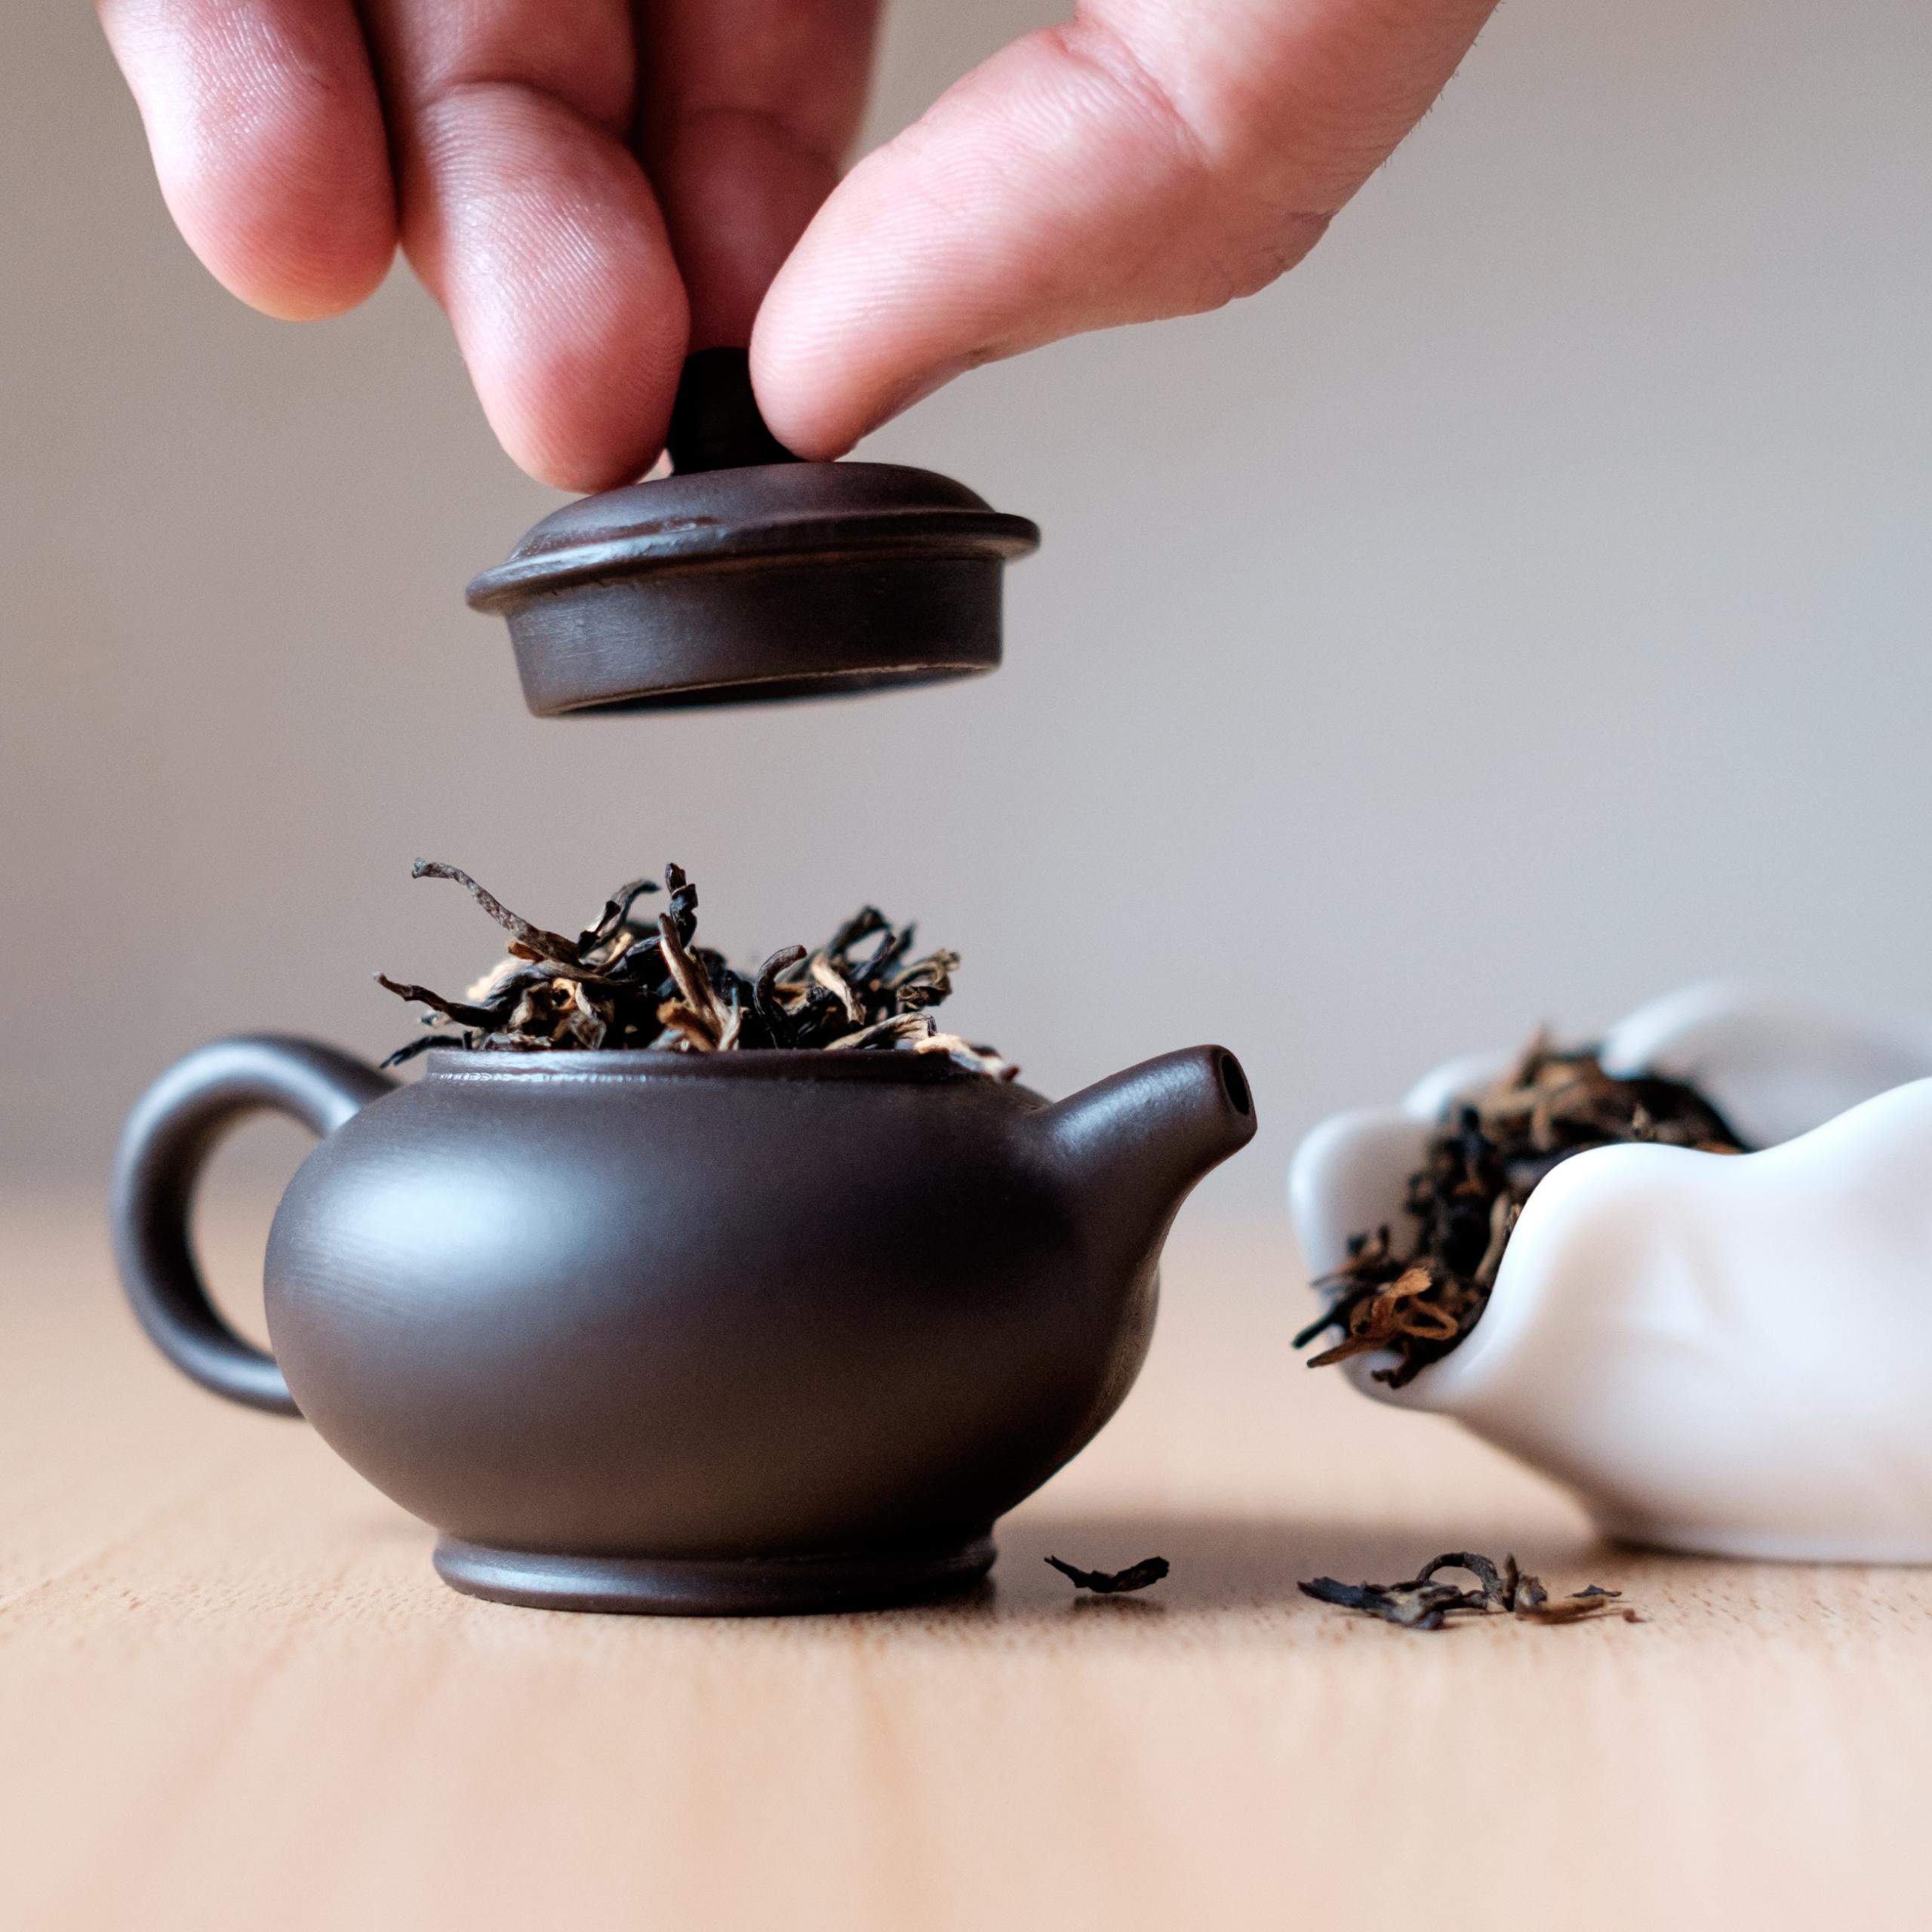 gongfu tea brewing with a small teapot and lots of leaves